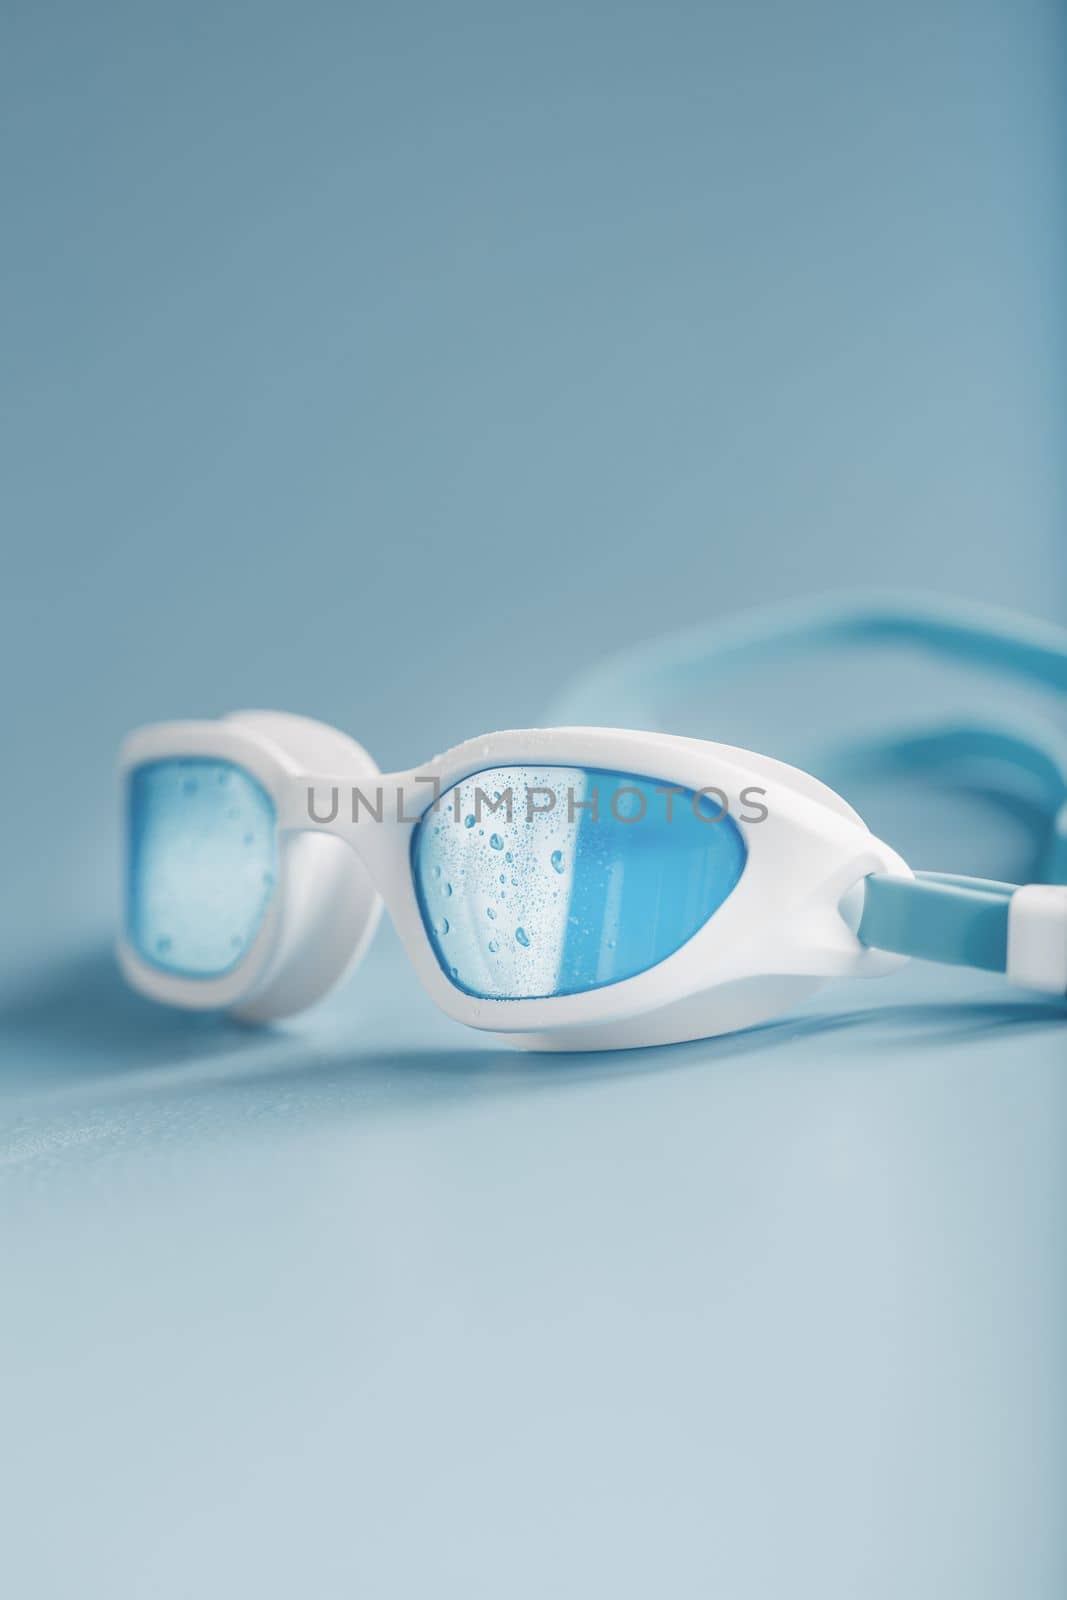 White swimming glasses with a blue lens by AlexGrec